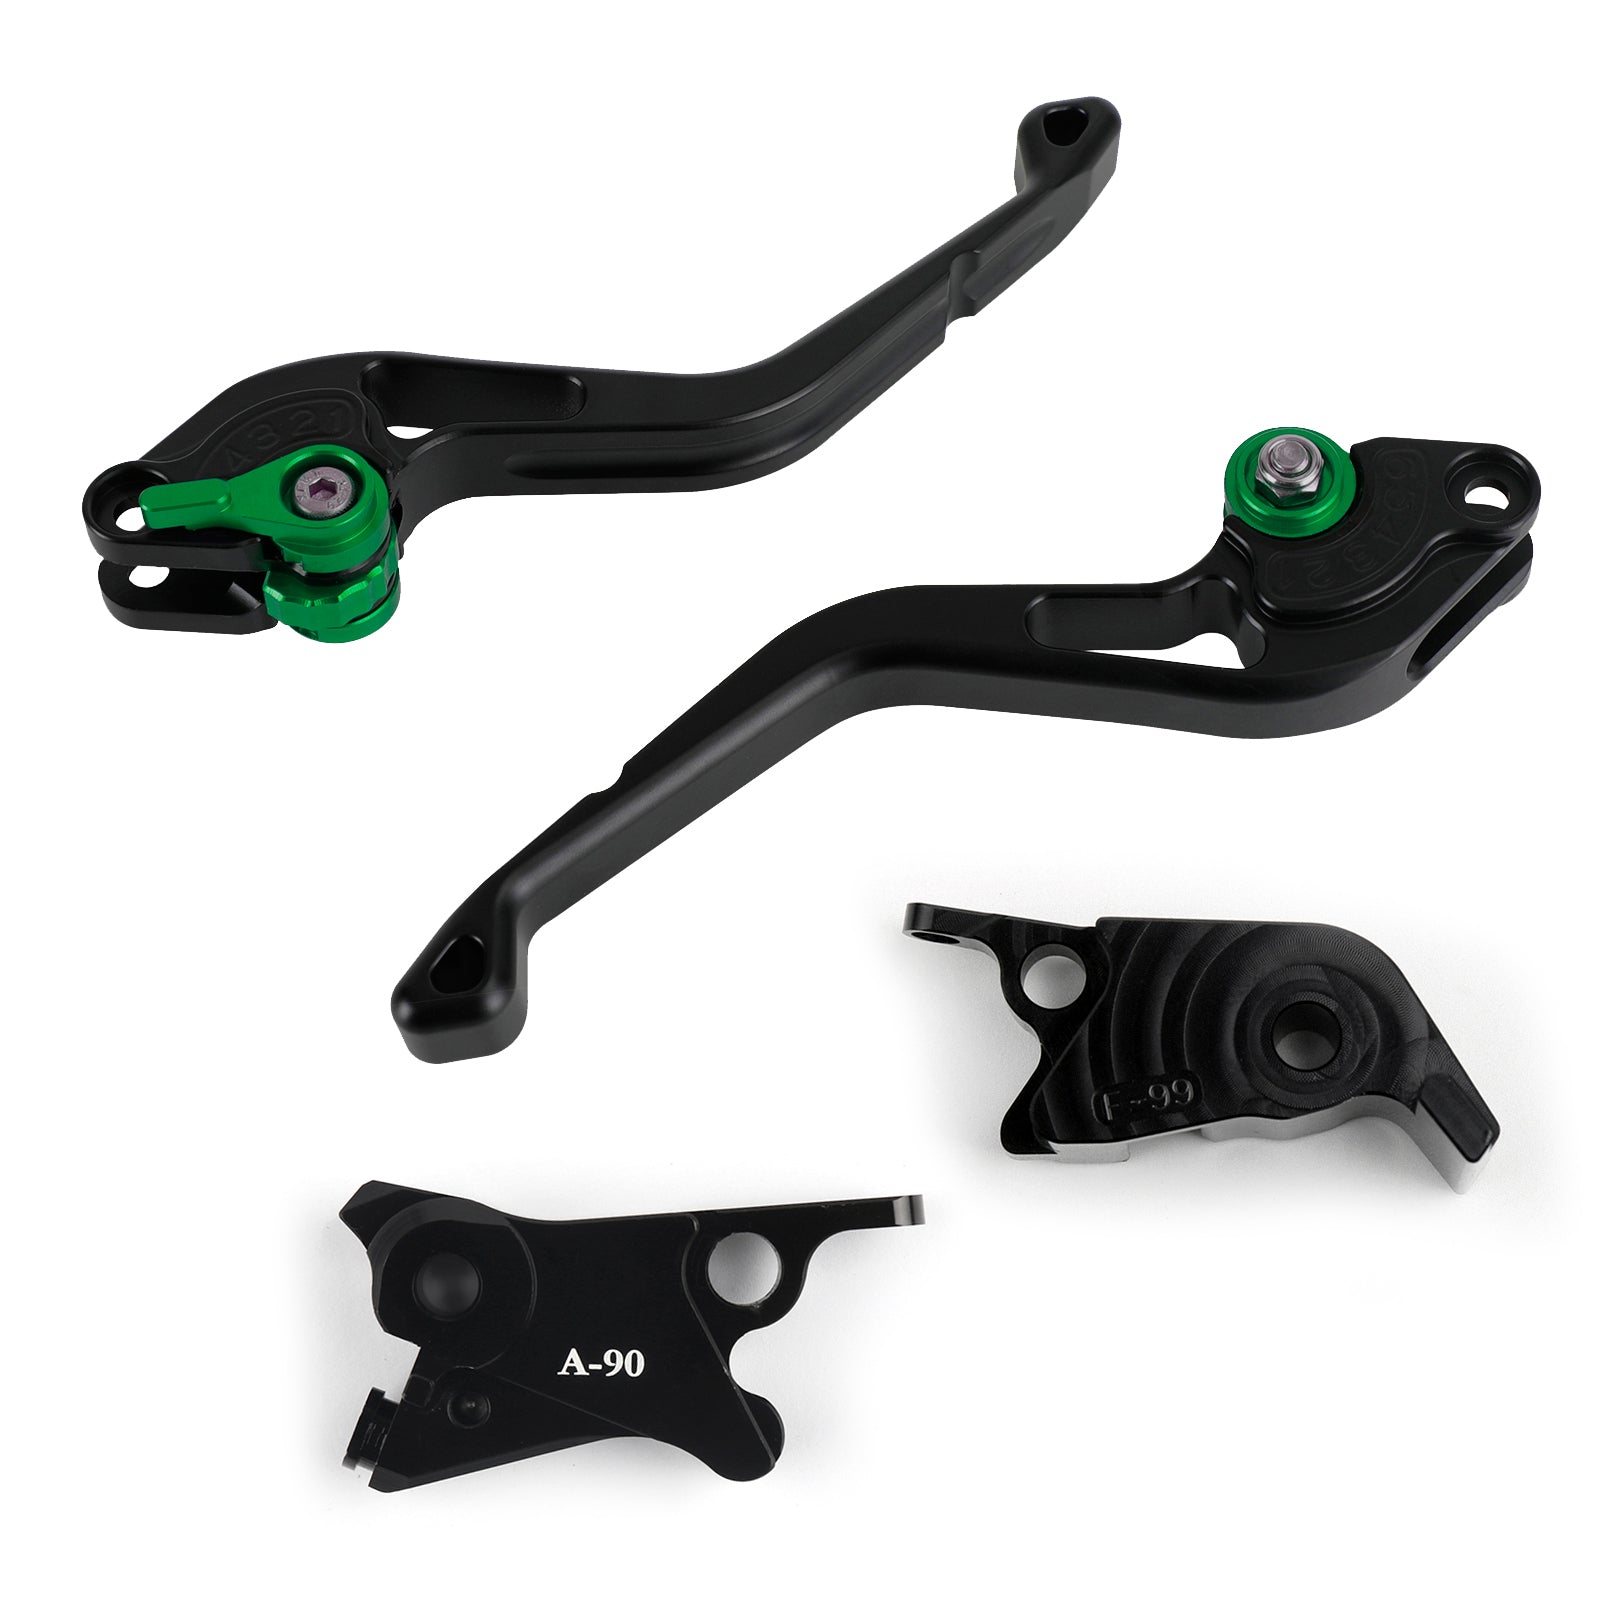 NEW Short Clutch Brake Lever fit for 690 R 2014-2017